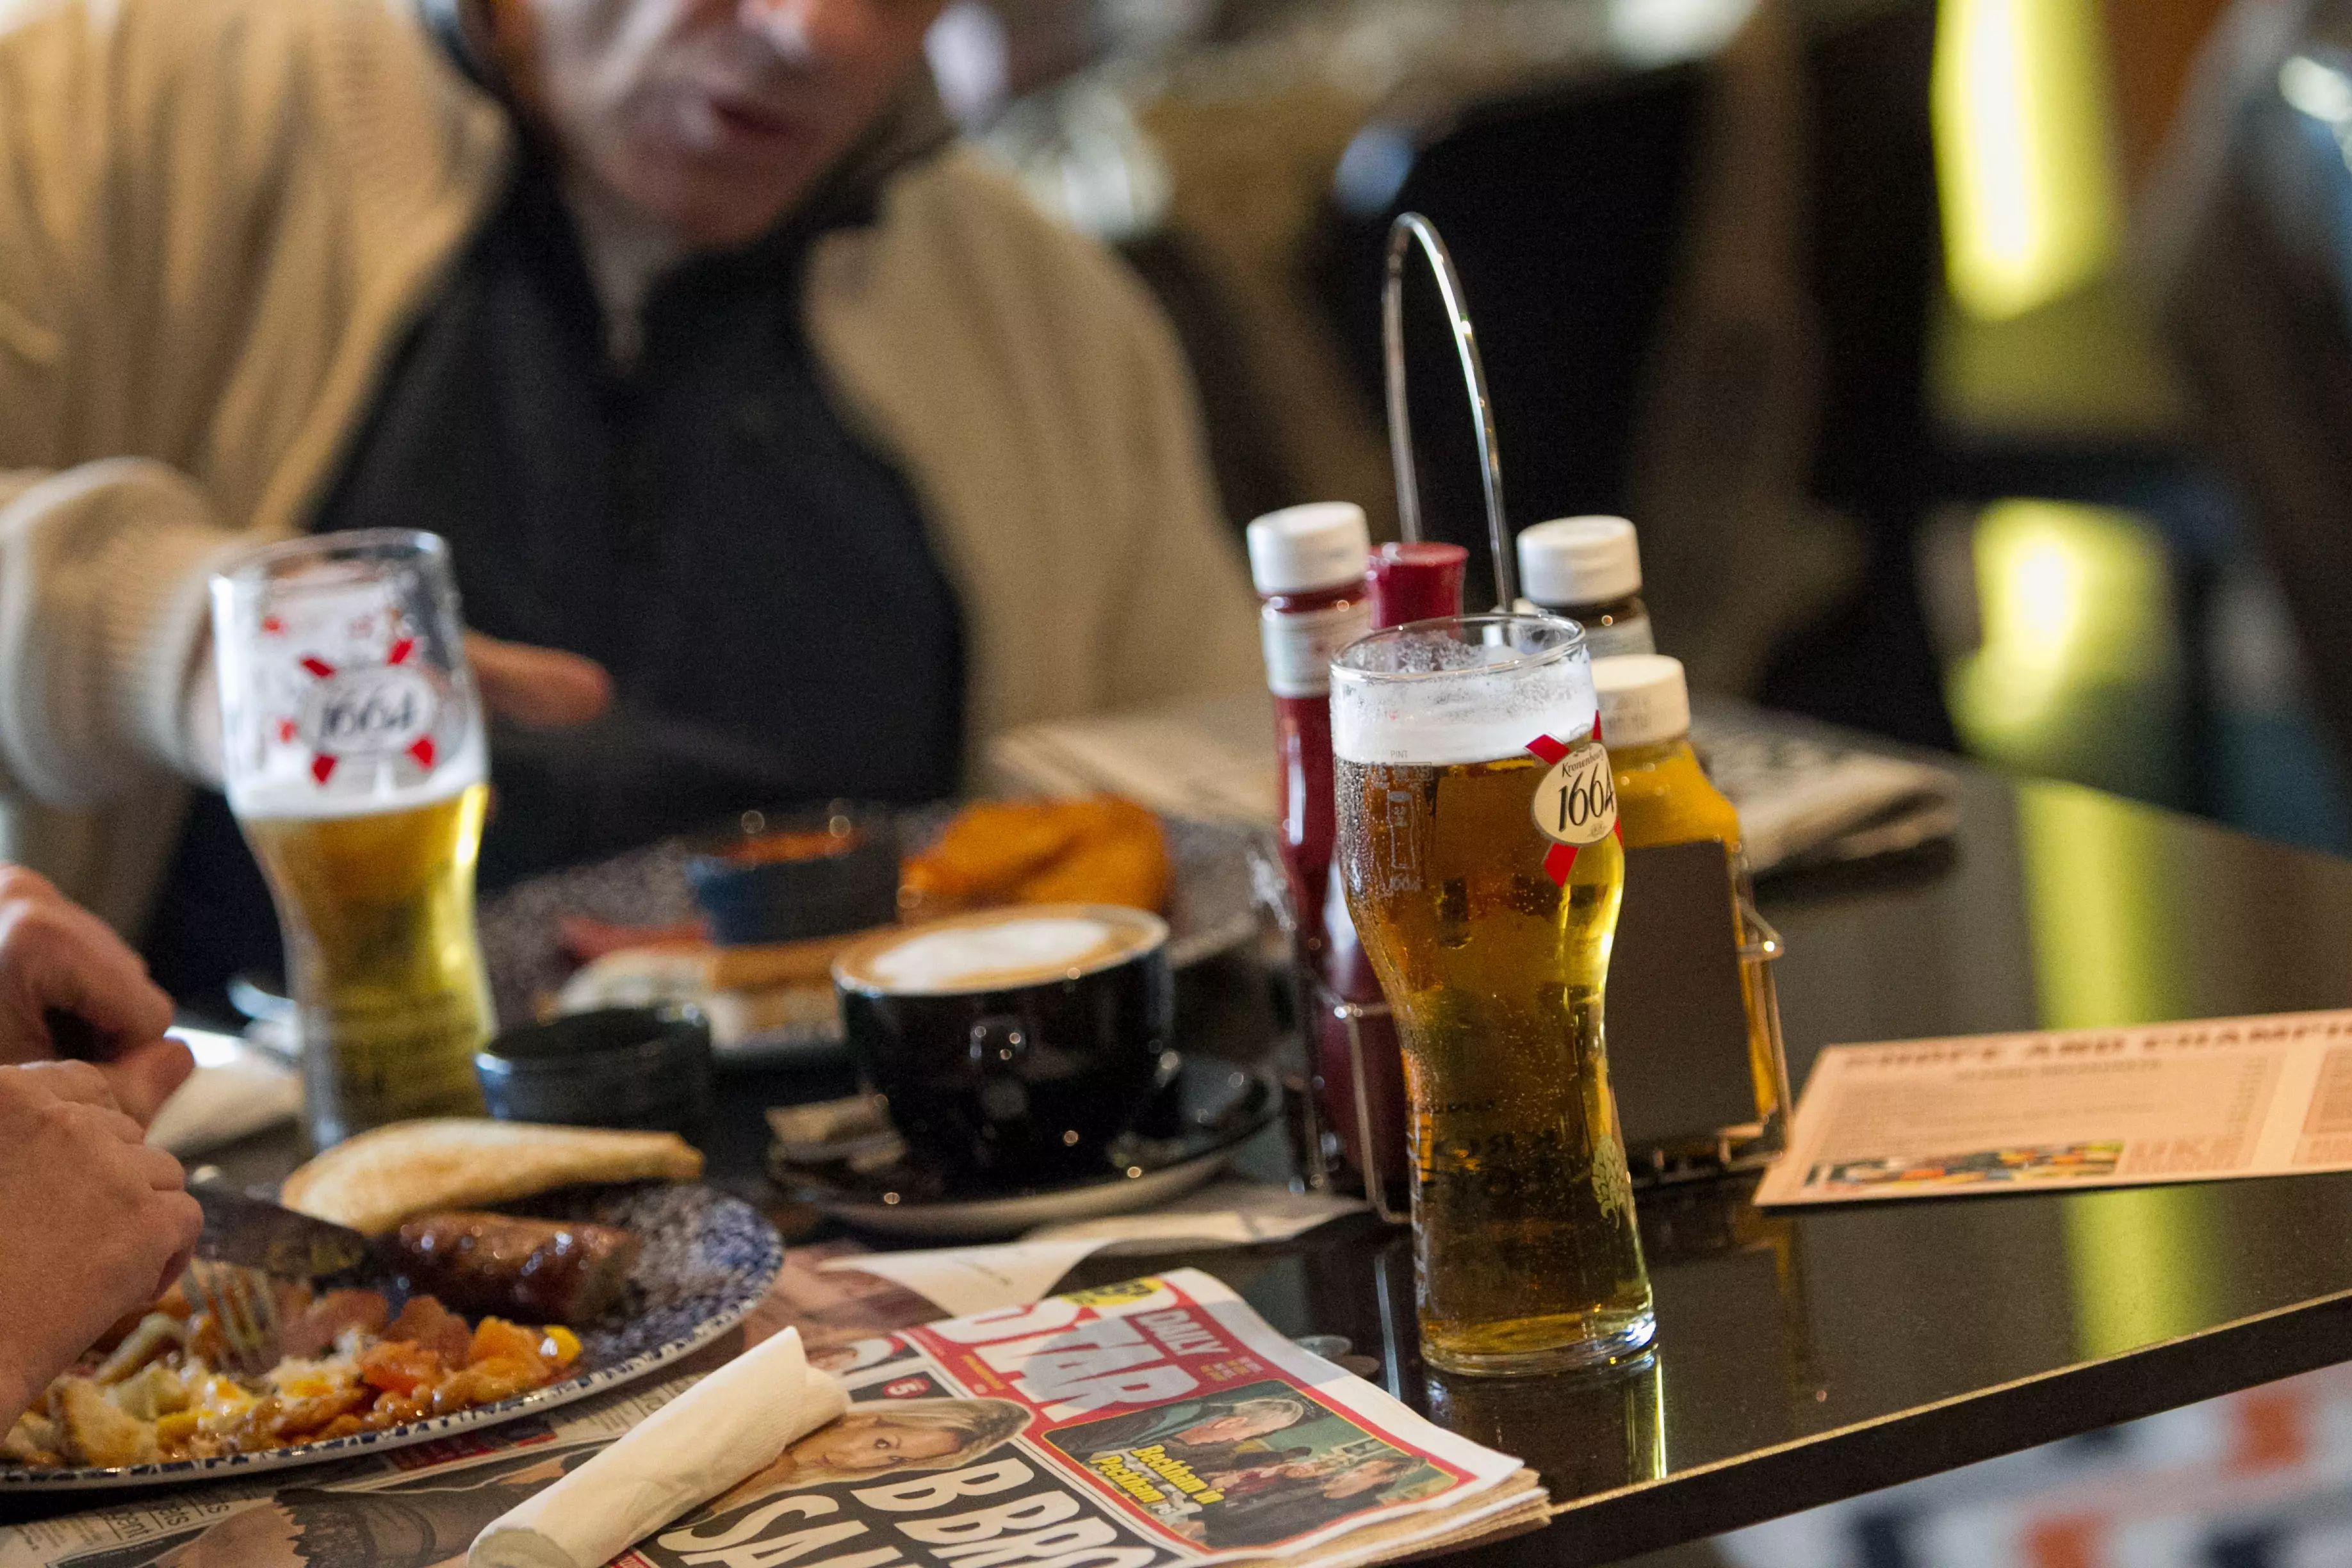 Wetherspoons Has Slashed The Price Of A Pint Of Beer To £1.69.